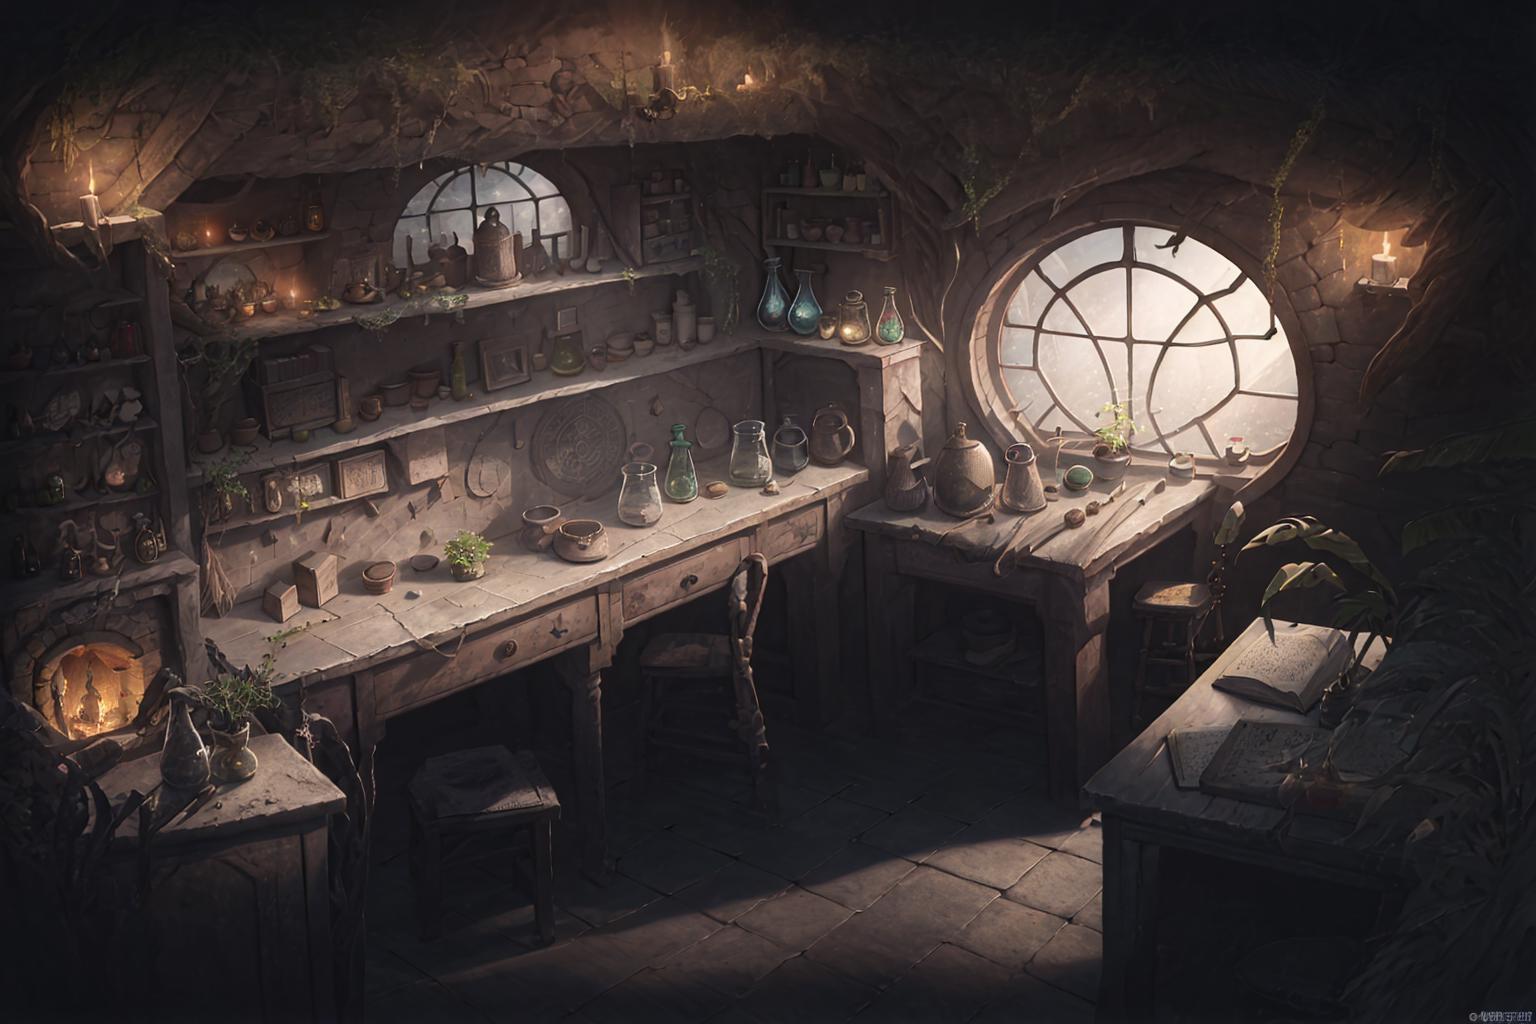 Hobbit home image by lyt1249192851413